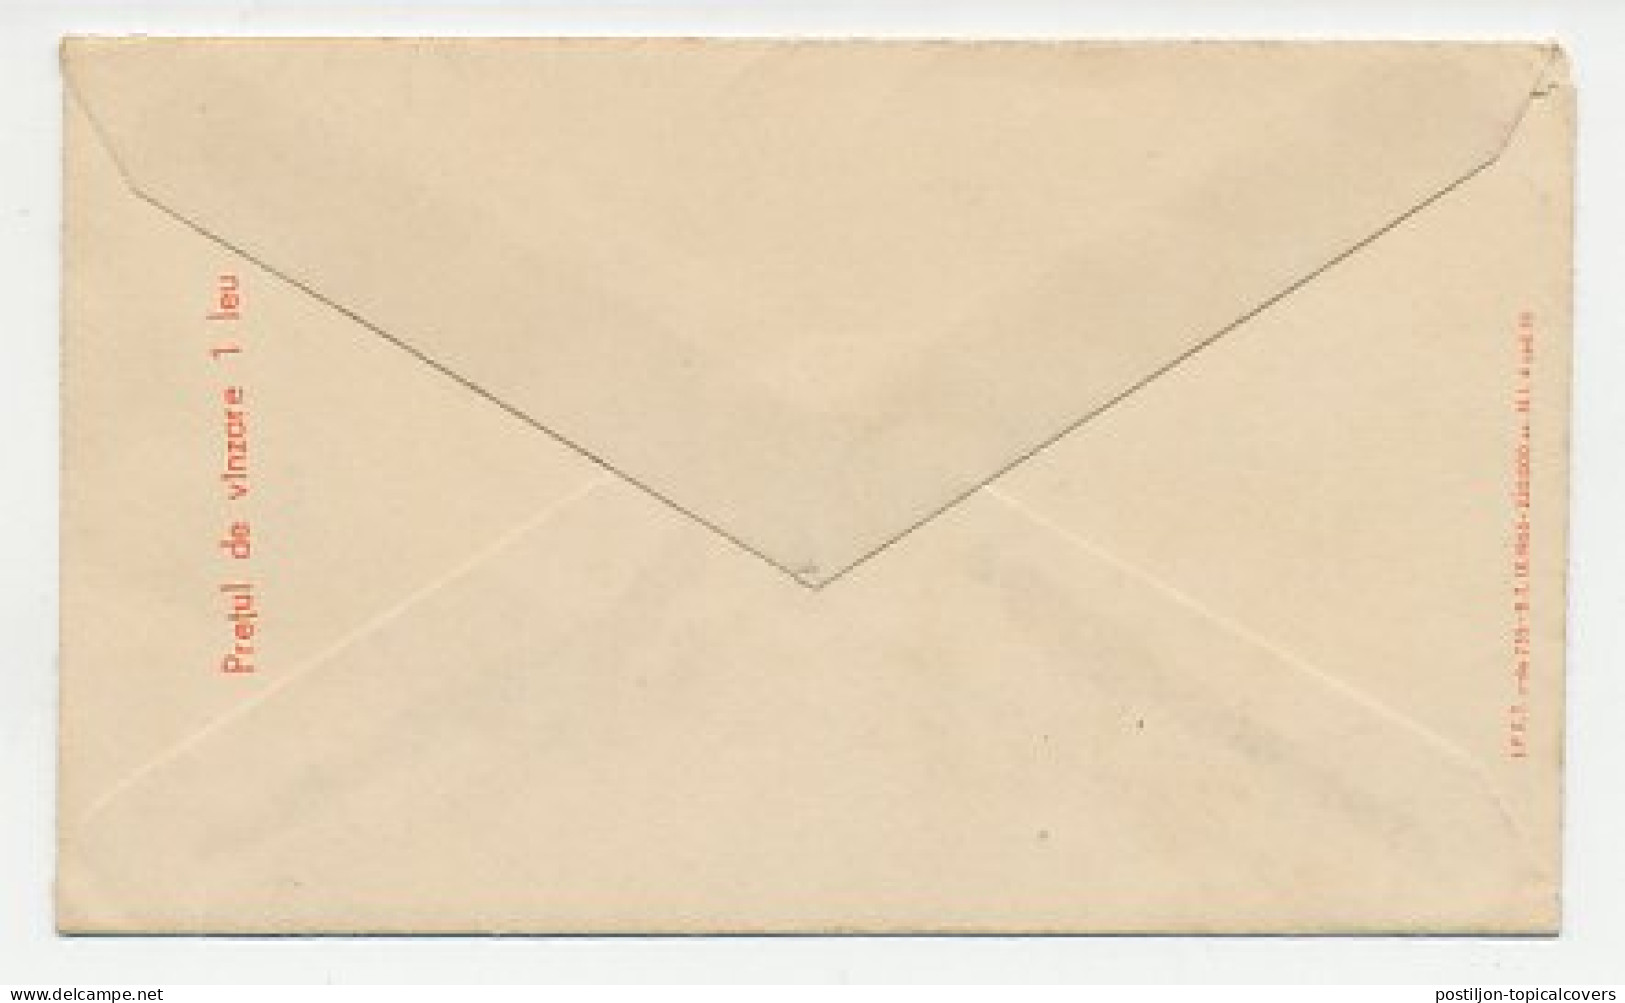 Postal Stationery Romania 1963 Writing Christmas Letter / Card - Unclassified